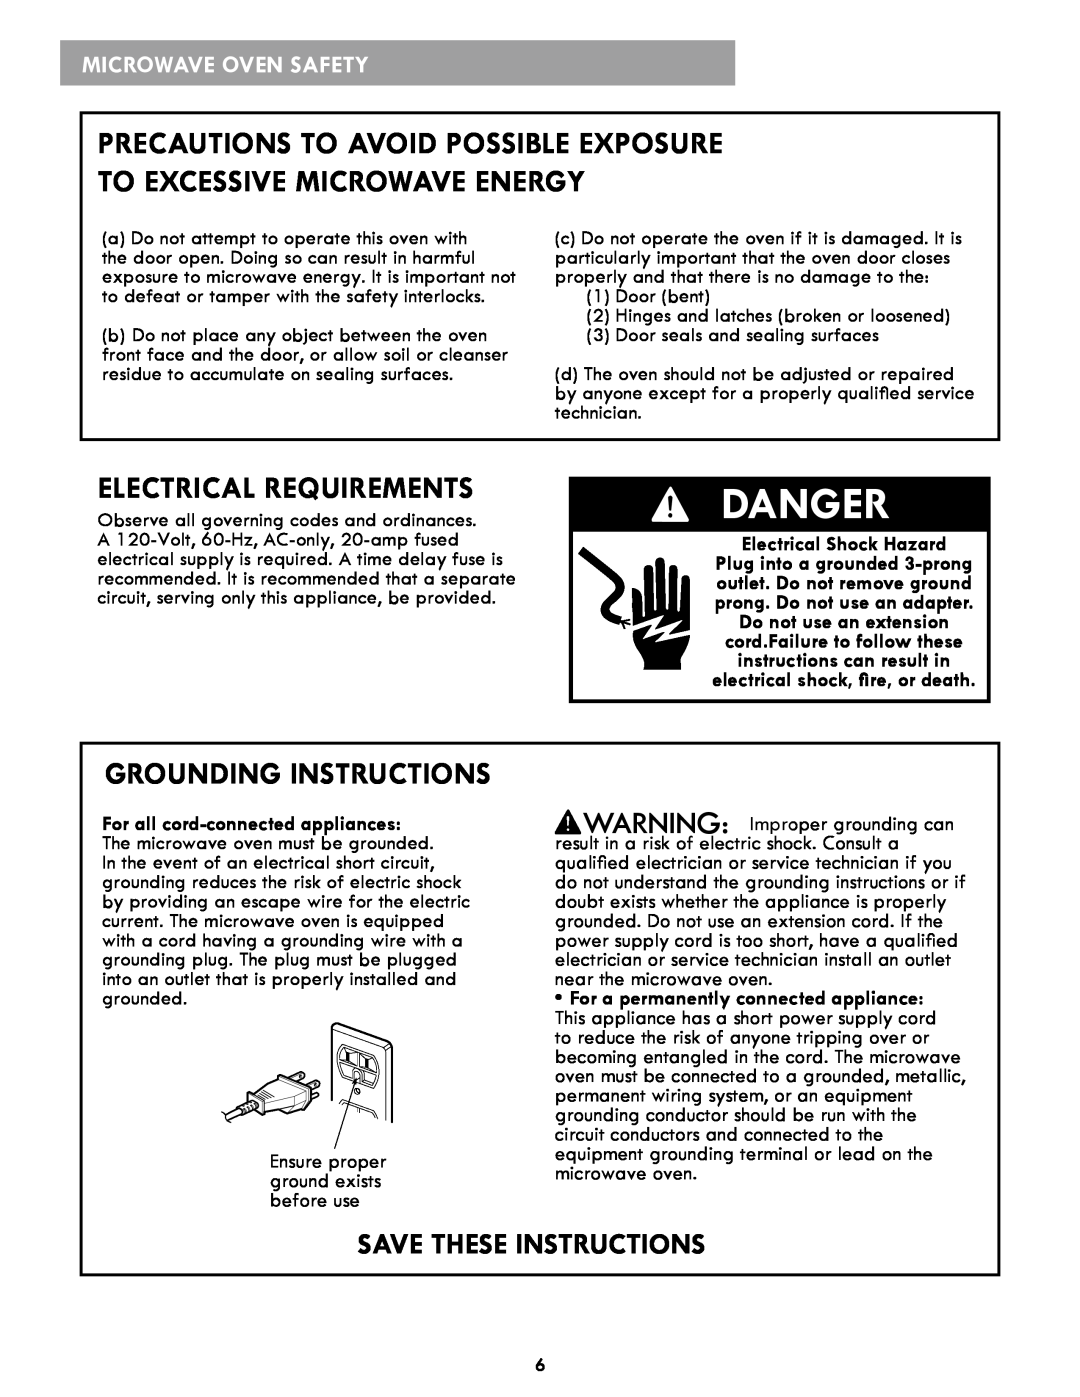 Kenmore 86013 Danger, Electrical Requirements, Grounding Instructions, Electrical Shock Hazard, Save These Instructions 